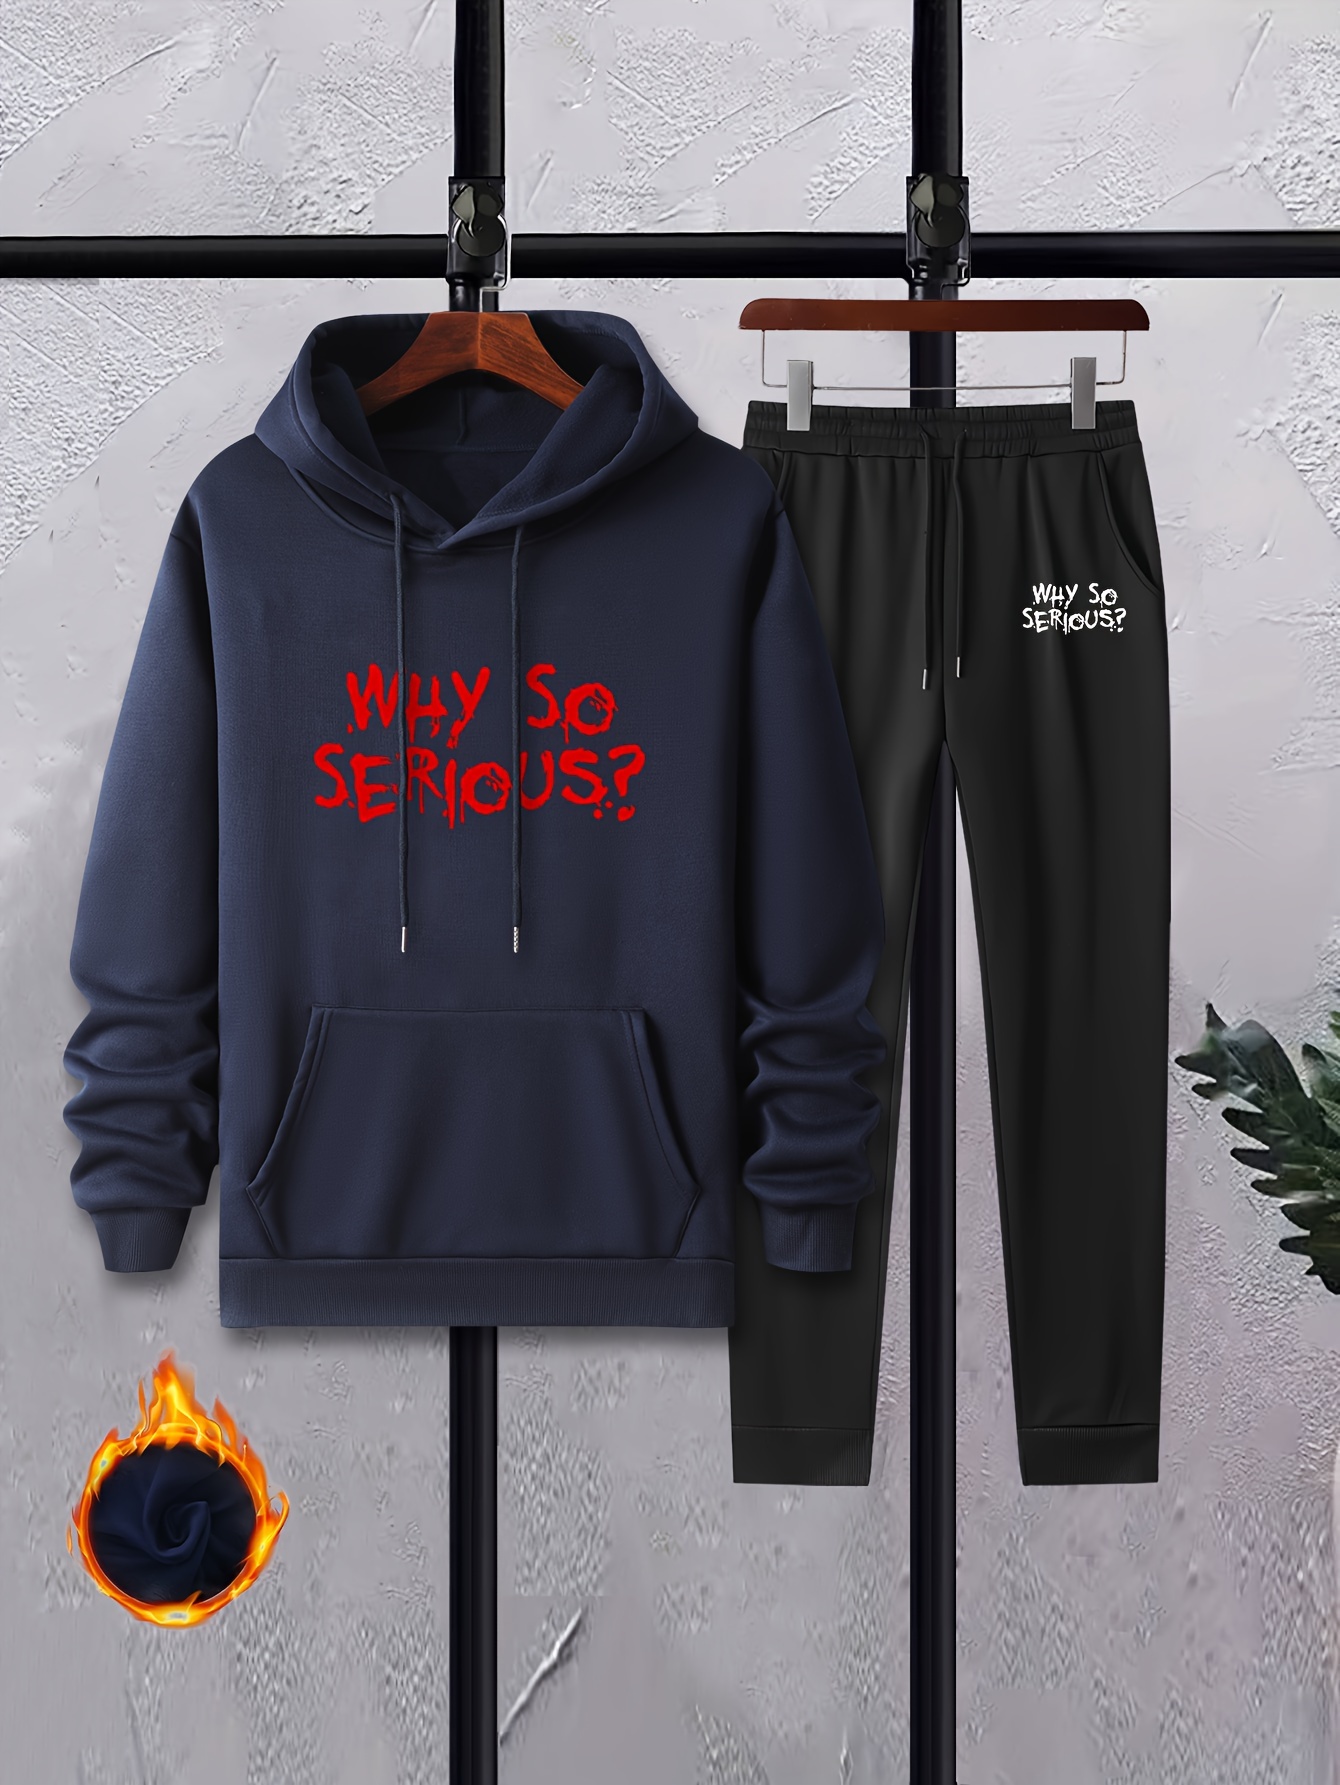 Serious Sweats Clothing